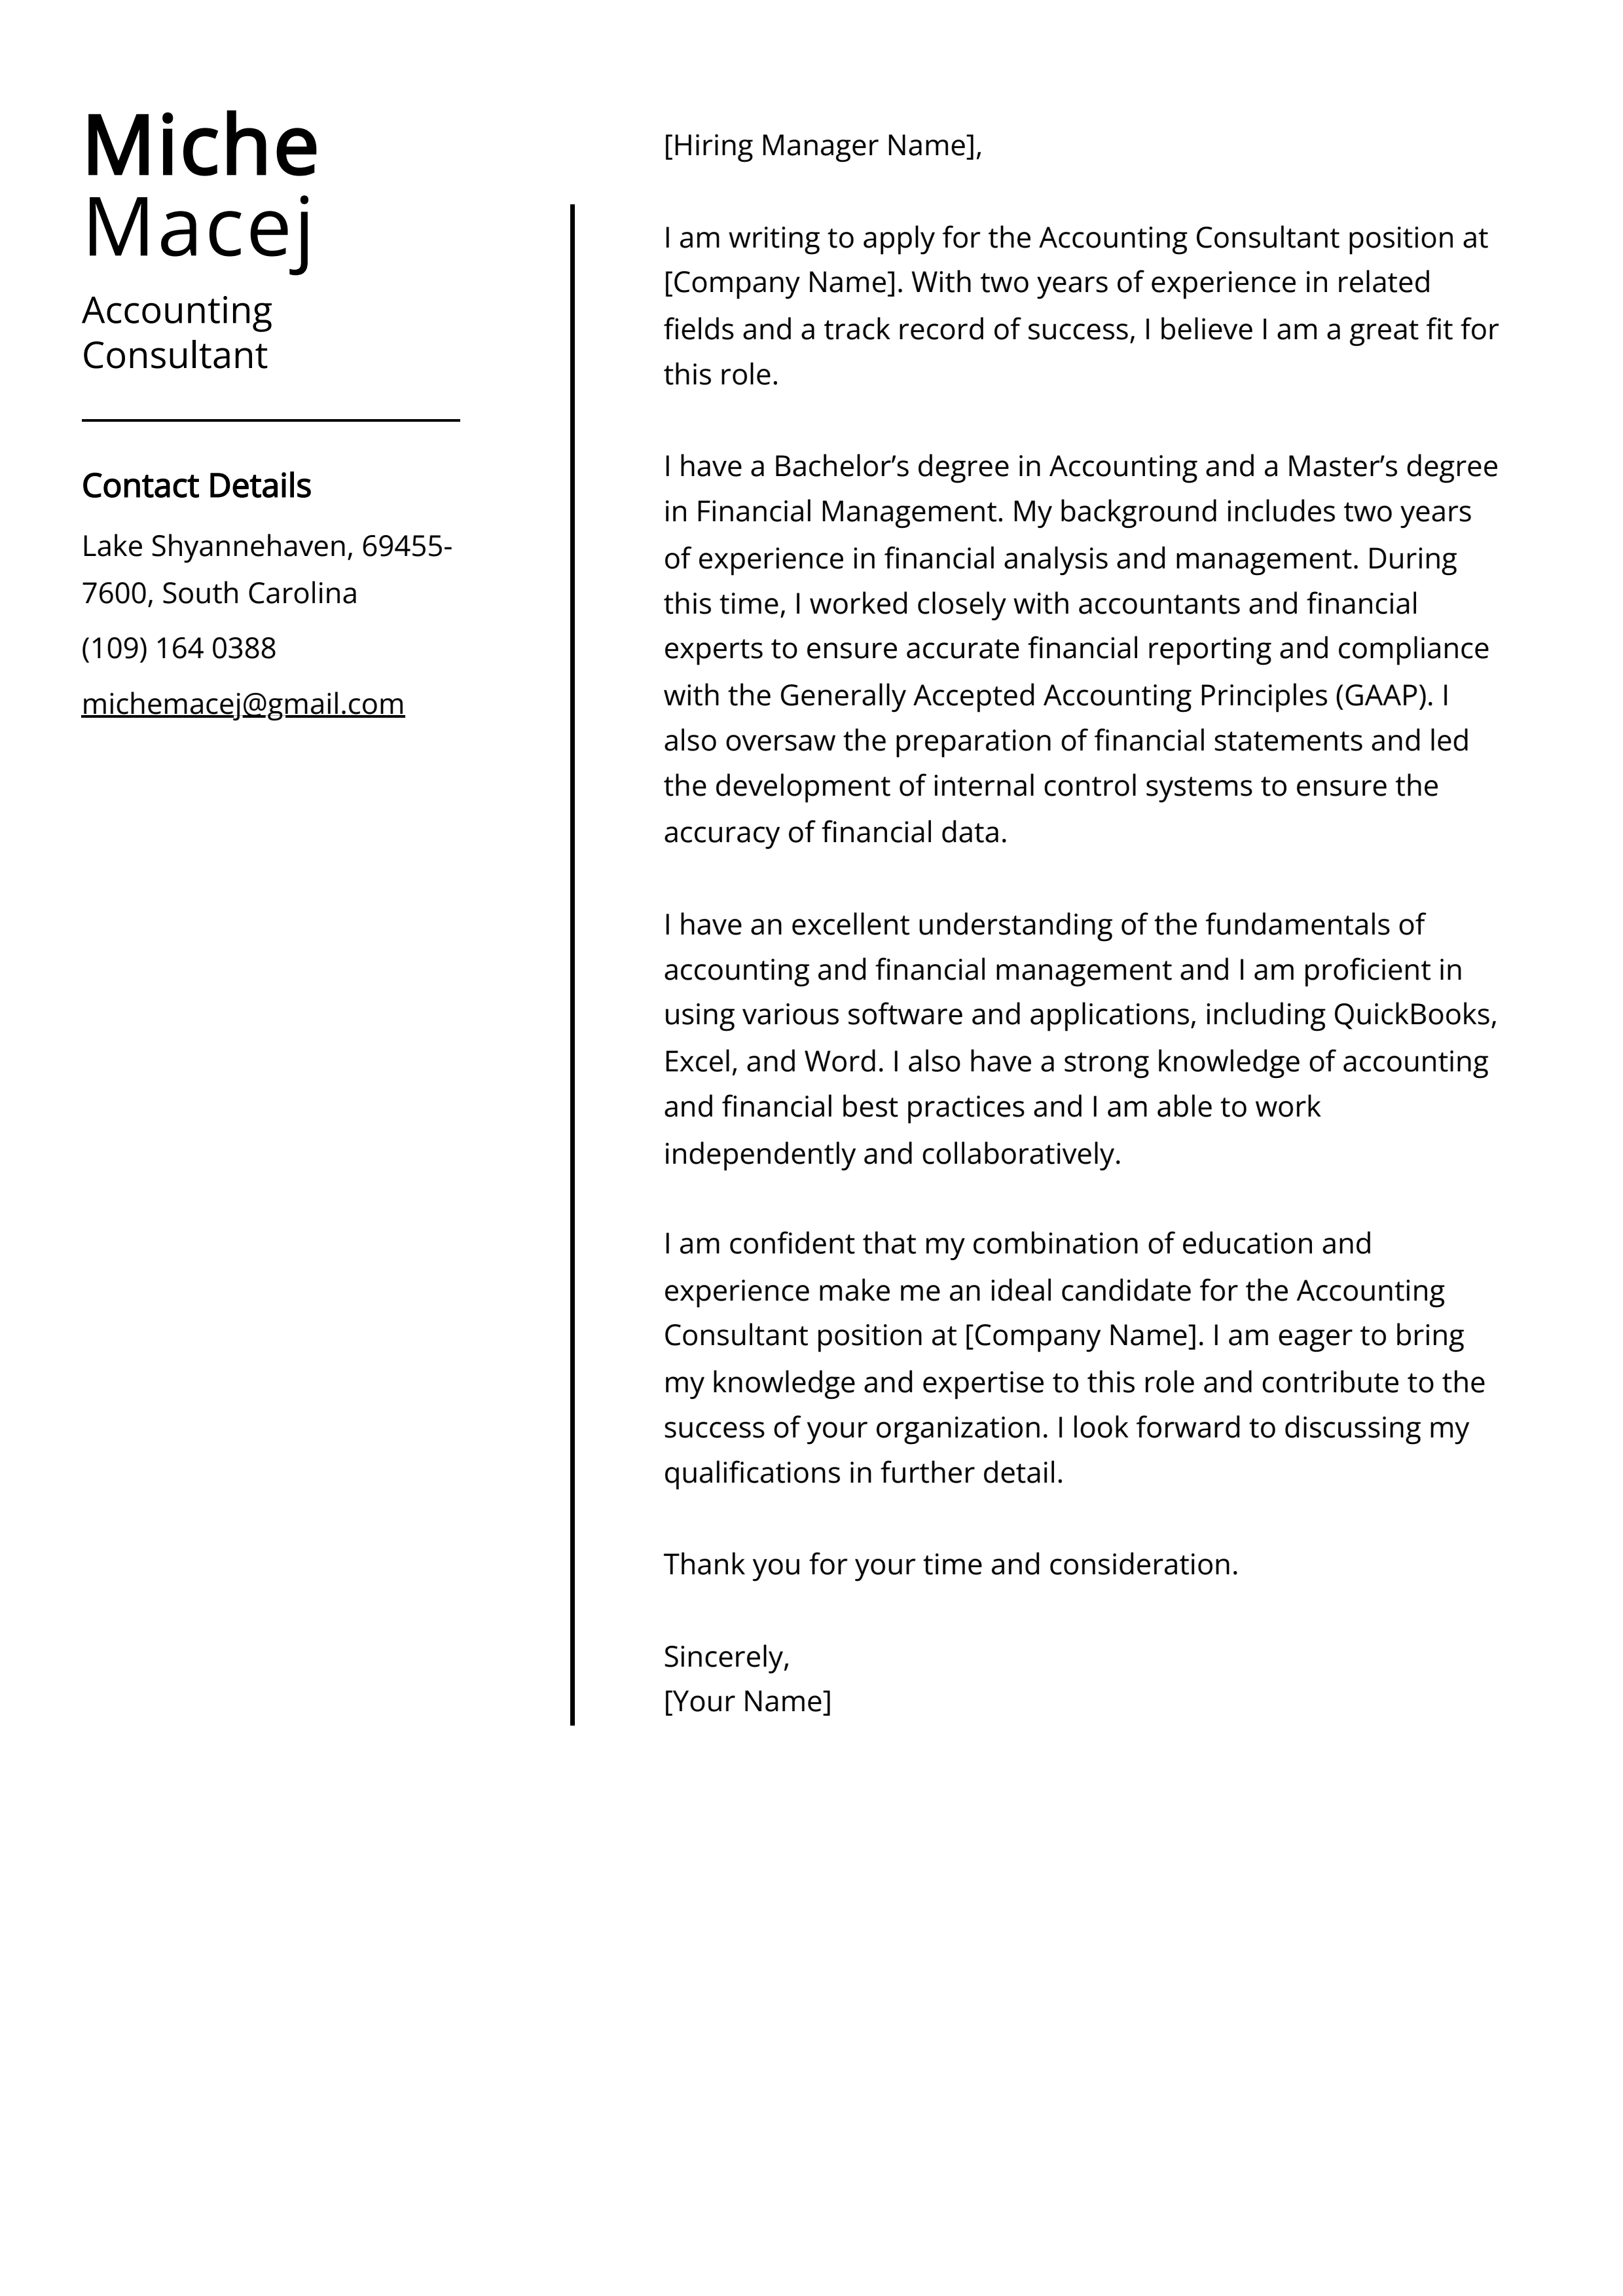 Accounting Consultant Cover Letter Example